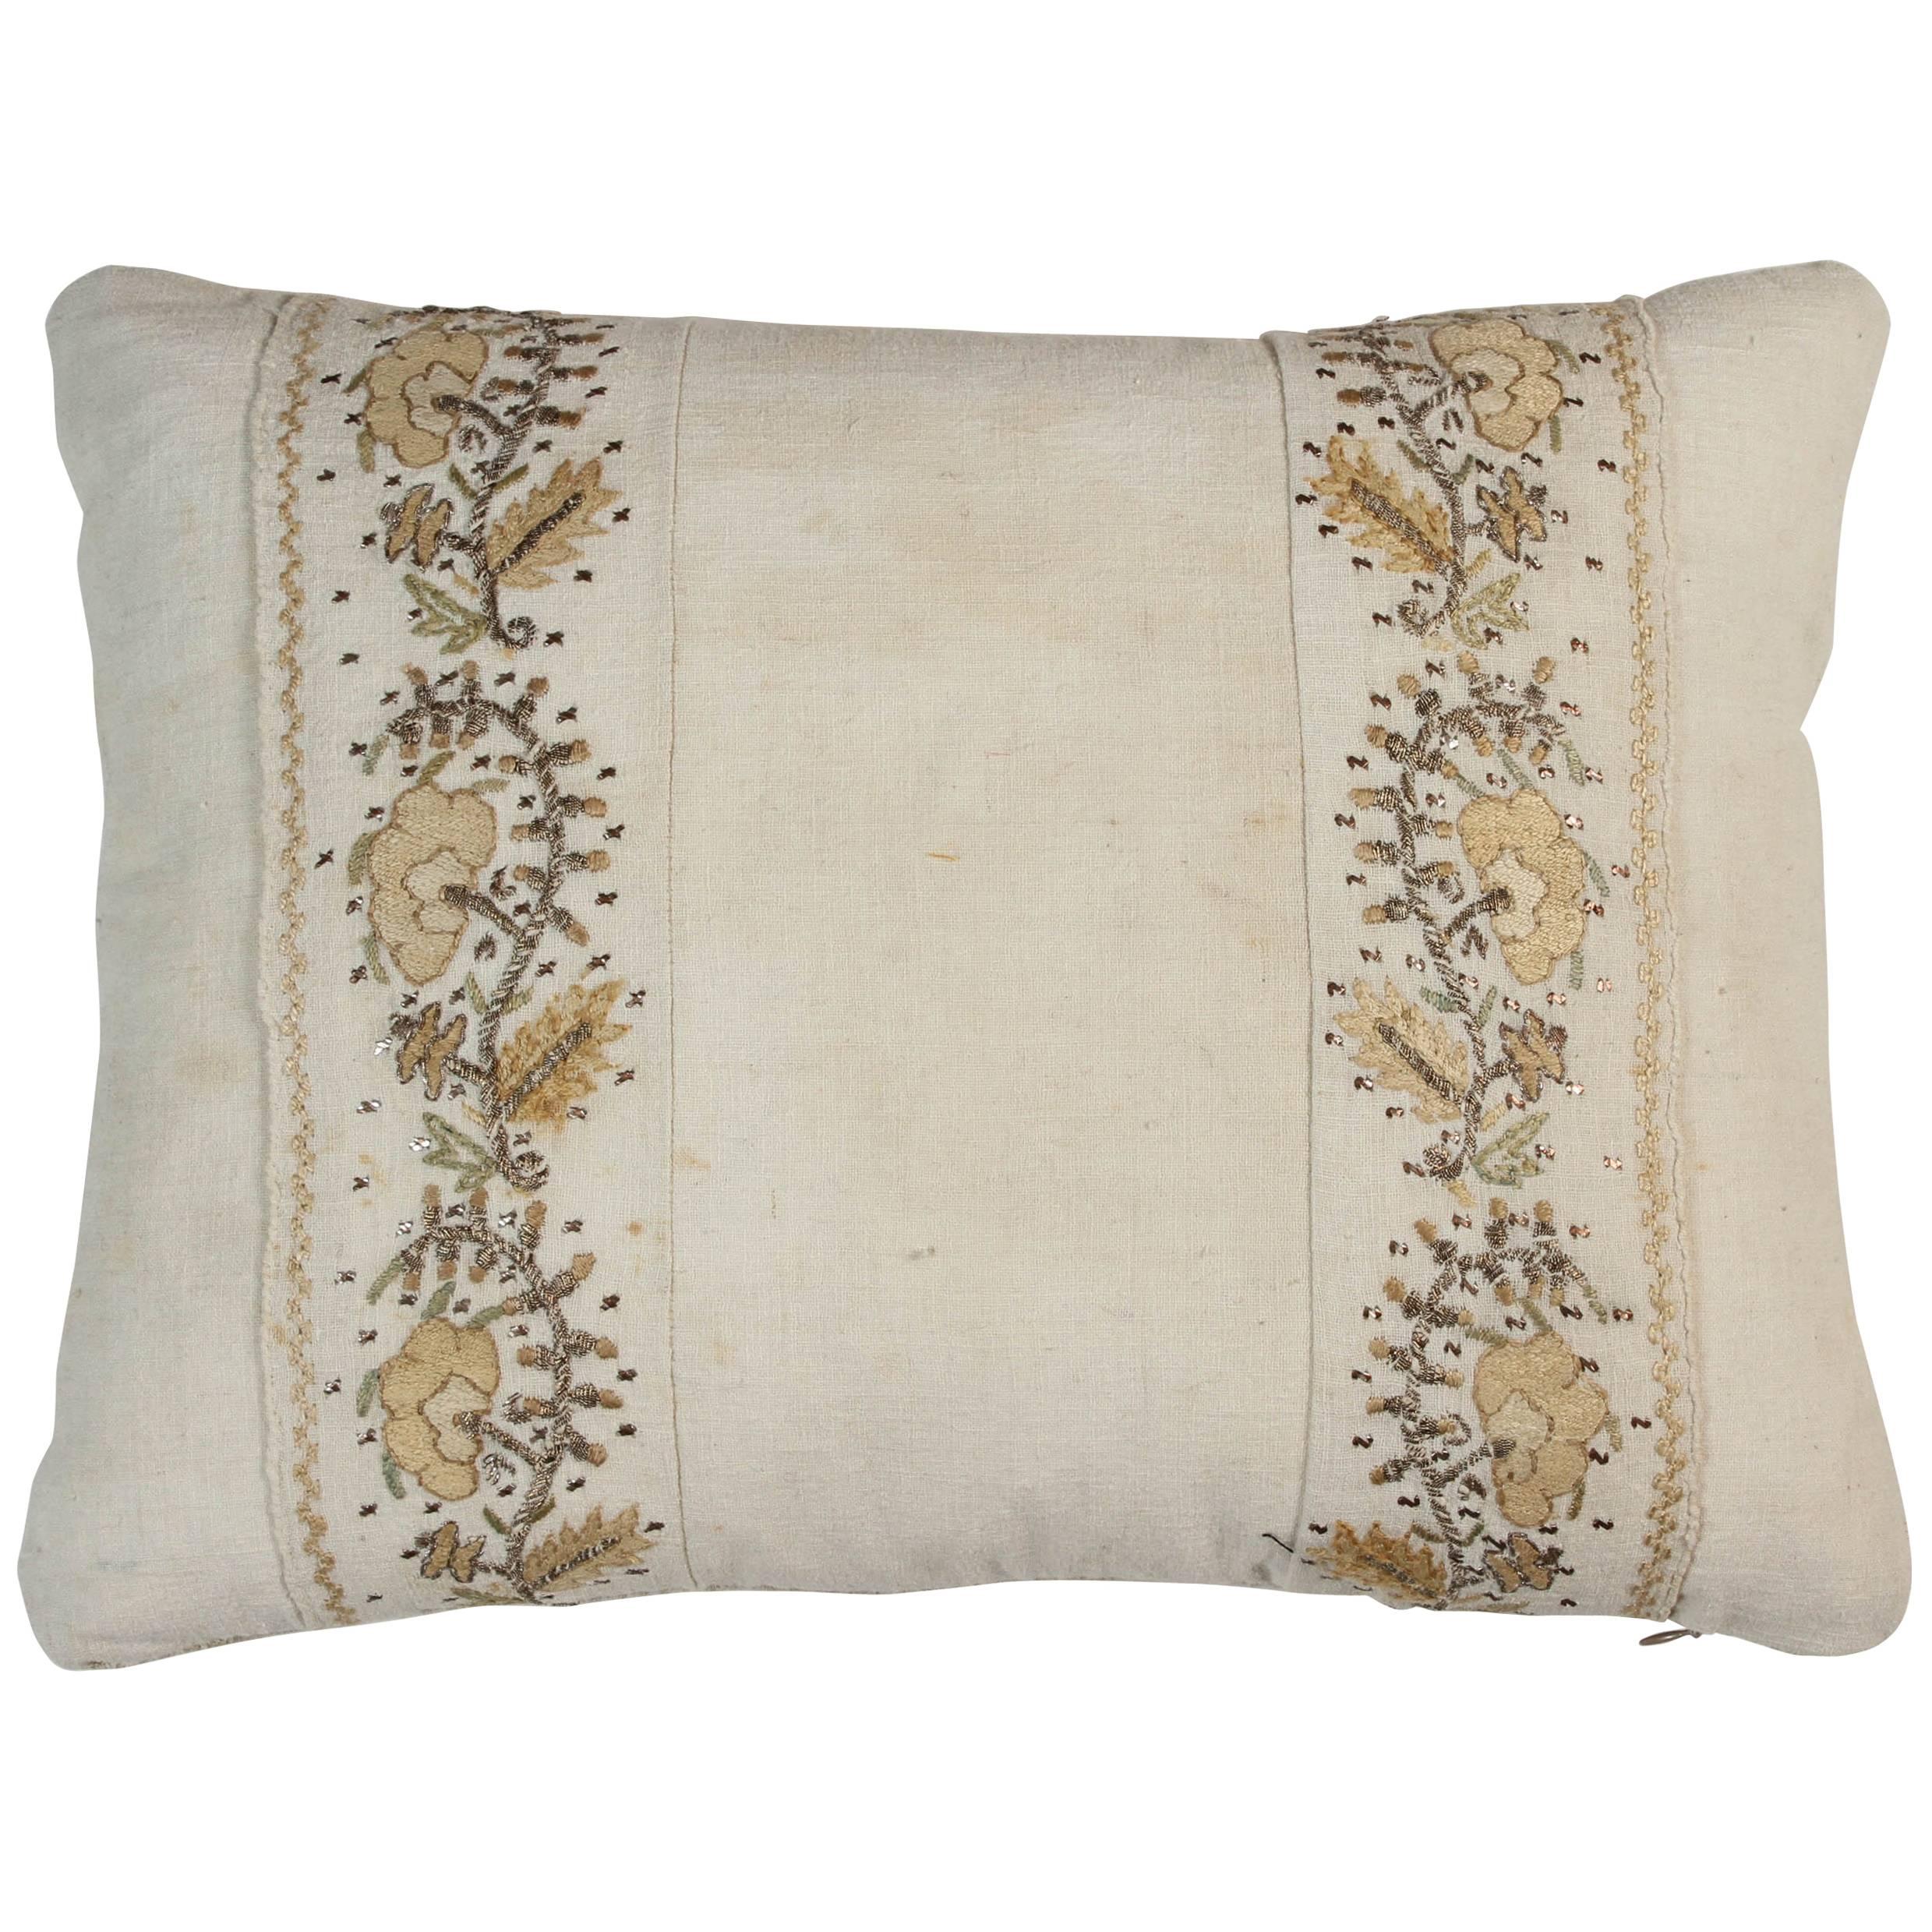 Turkish Ottoman Embroidery Pillow For Sale